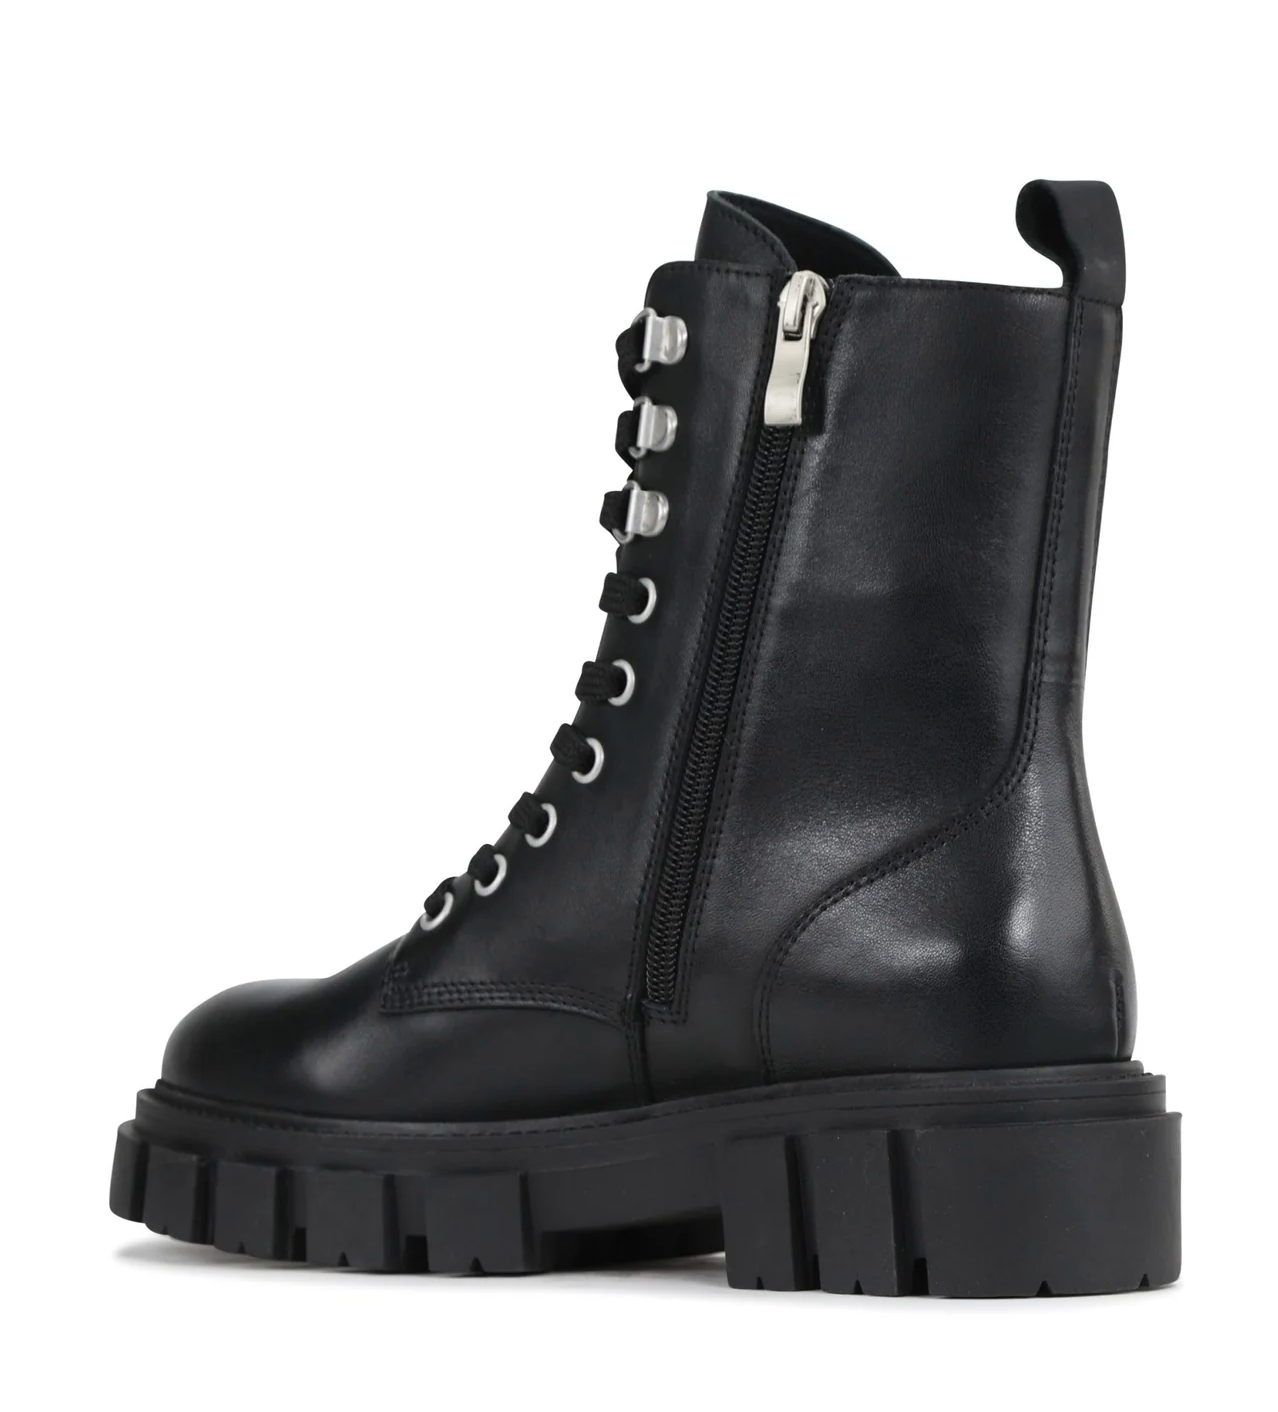 EOS FEATURE BLACK - Women Boots - Collective Shoes 